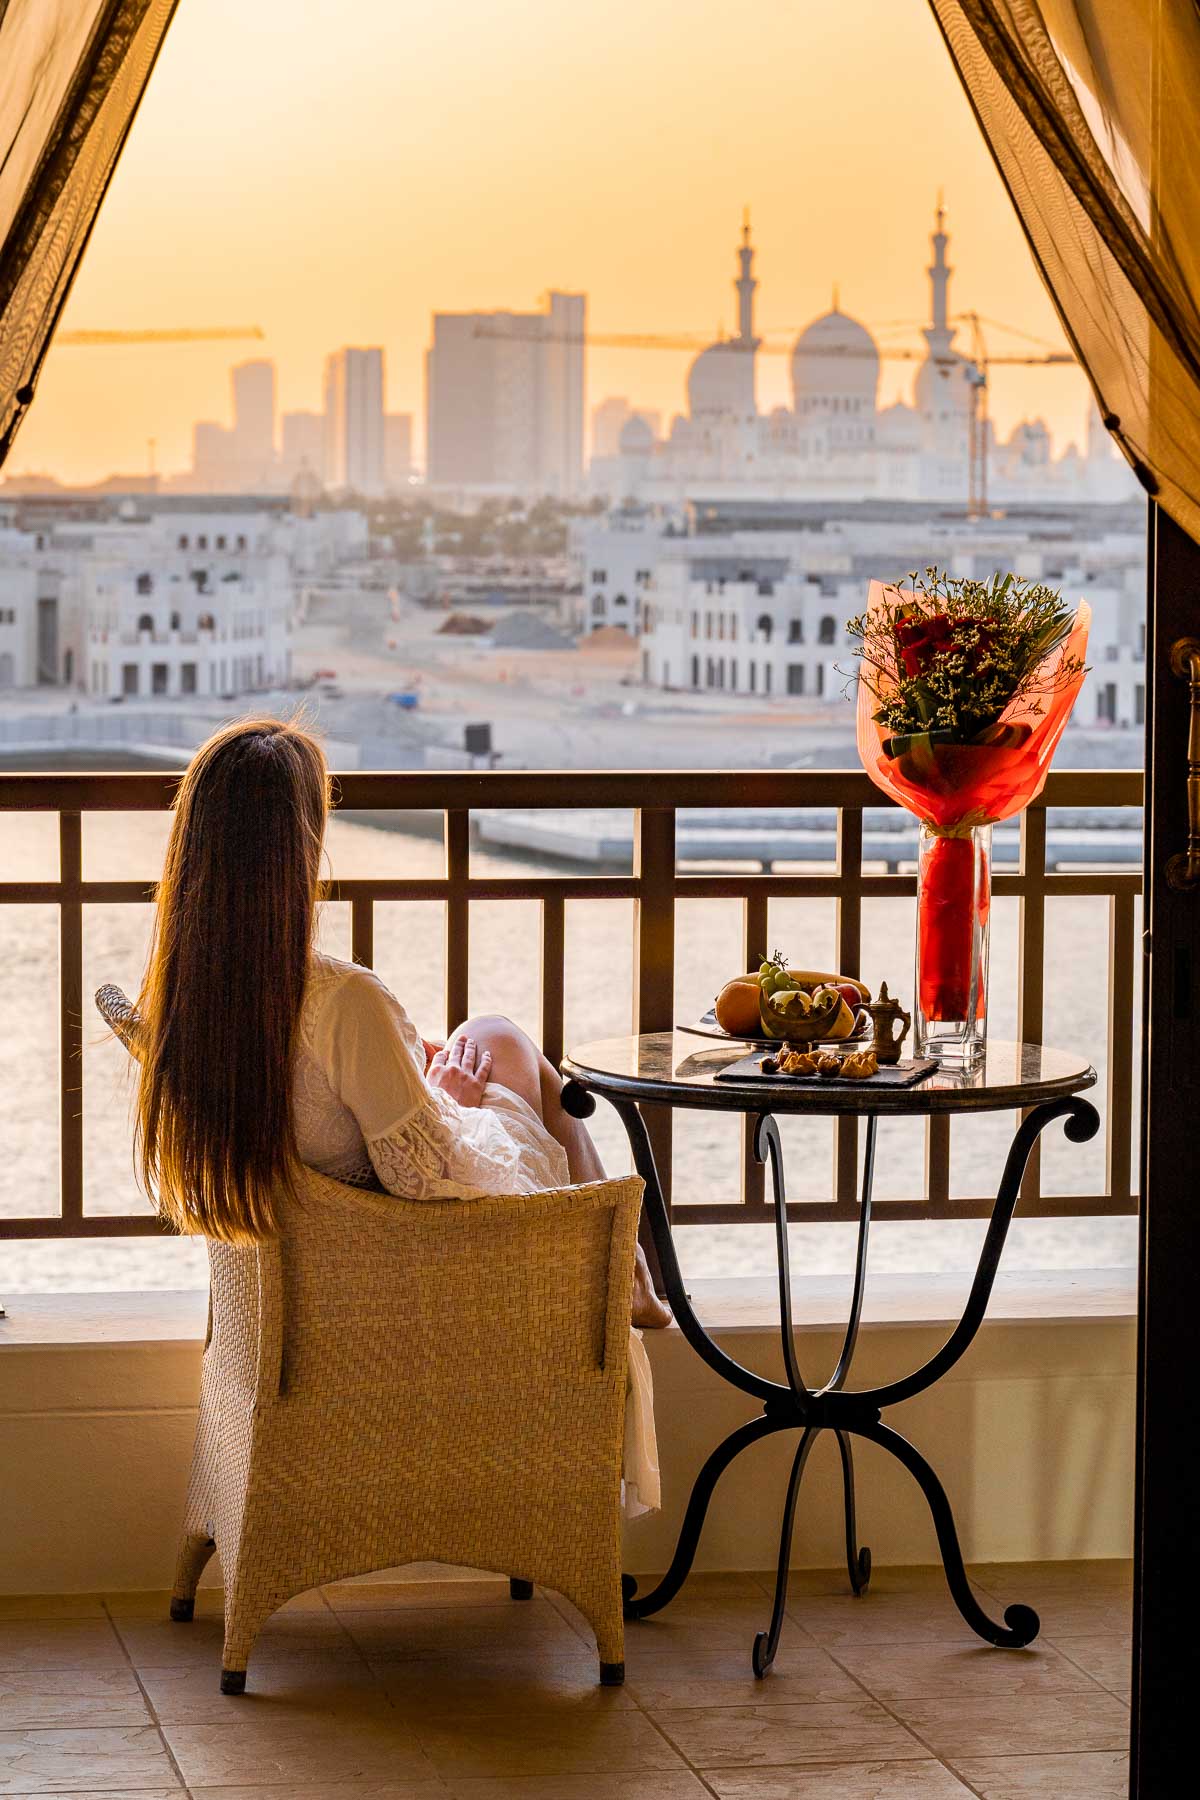 View of the Sheikh Zayed Grand Mosque from the Horizon Club Deluxe Room at Shangri-La Abu Dhabi with girl